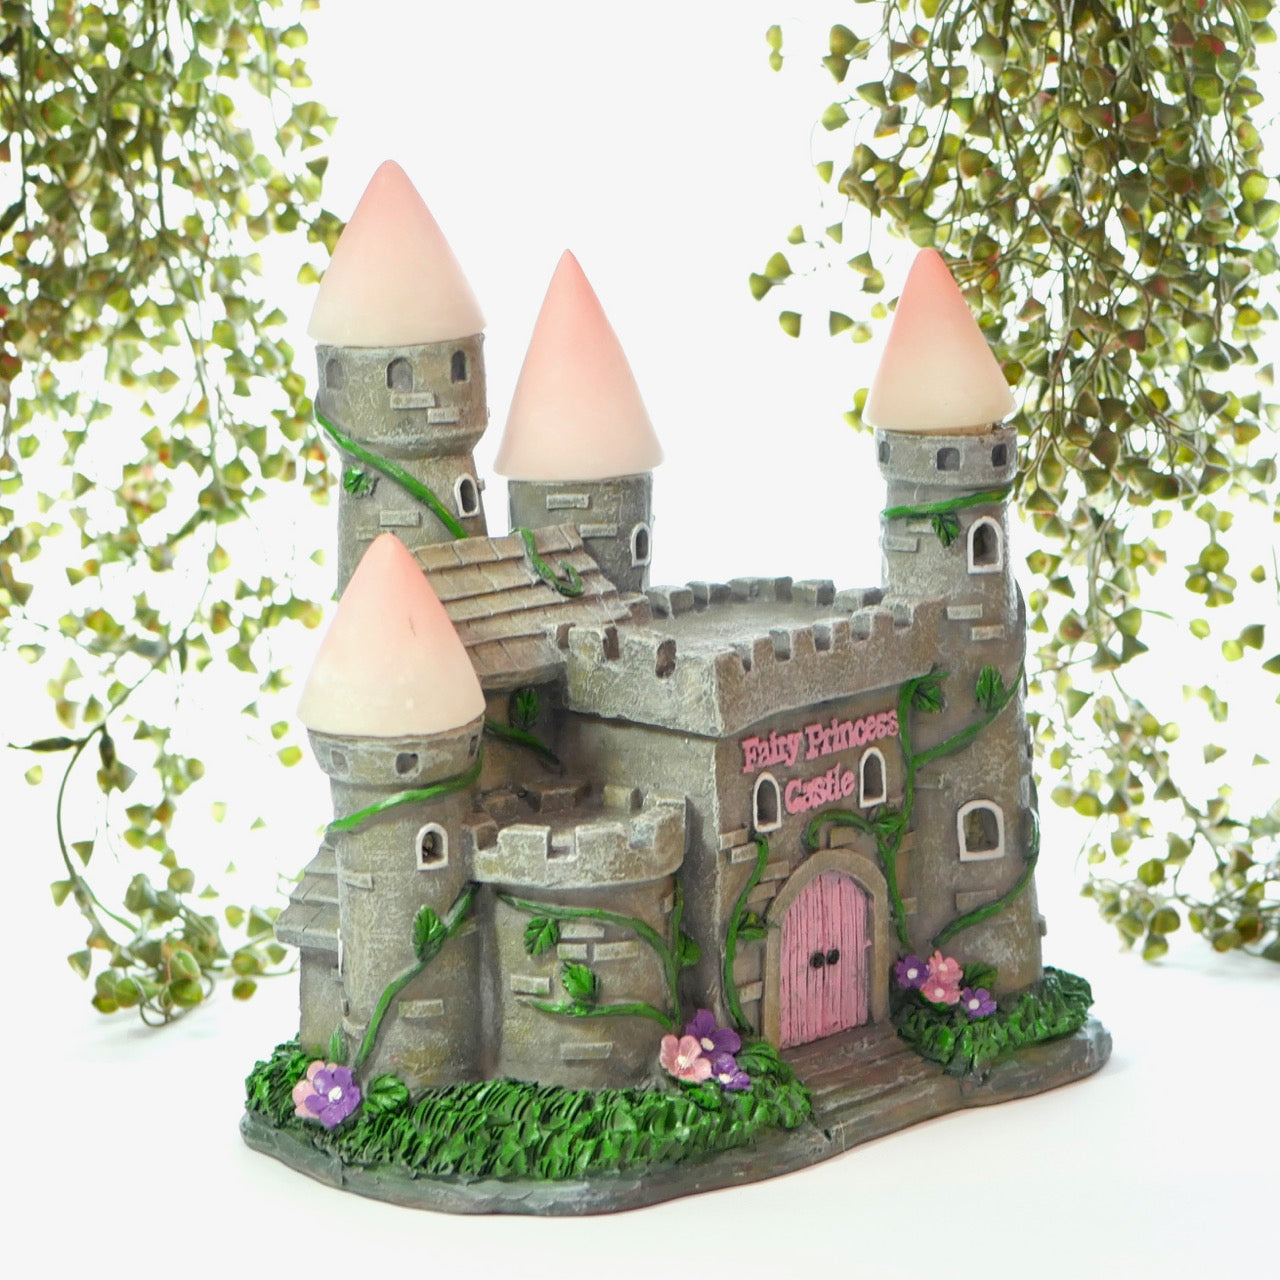 Fairy Garden Princess Castle with Solar Powered Lights from Steph the Fairy Maker in Australia